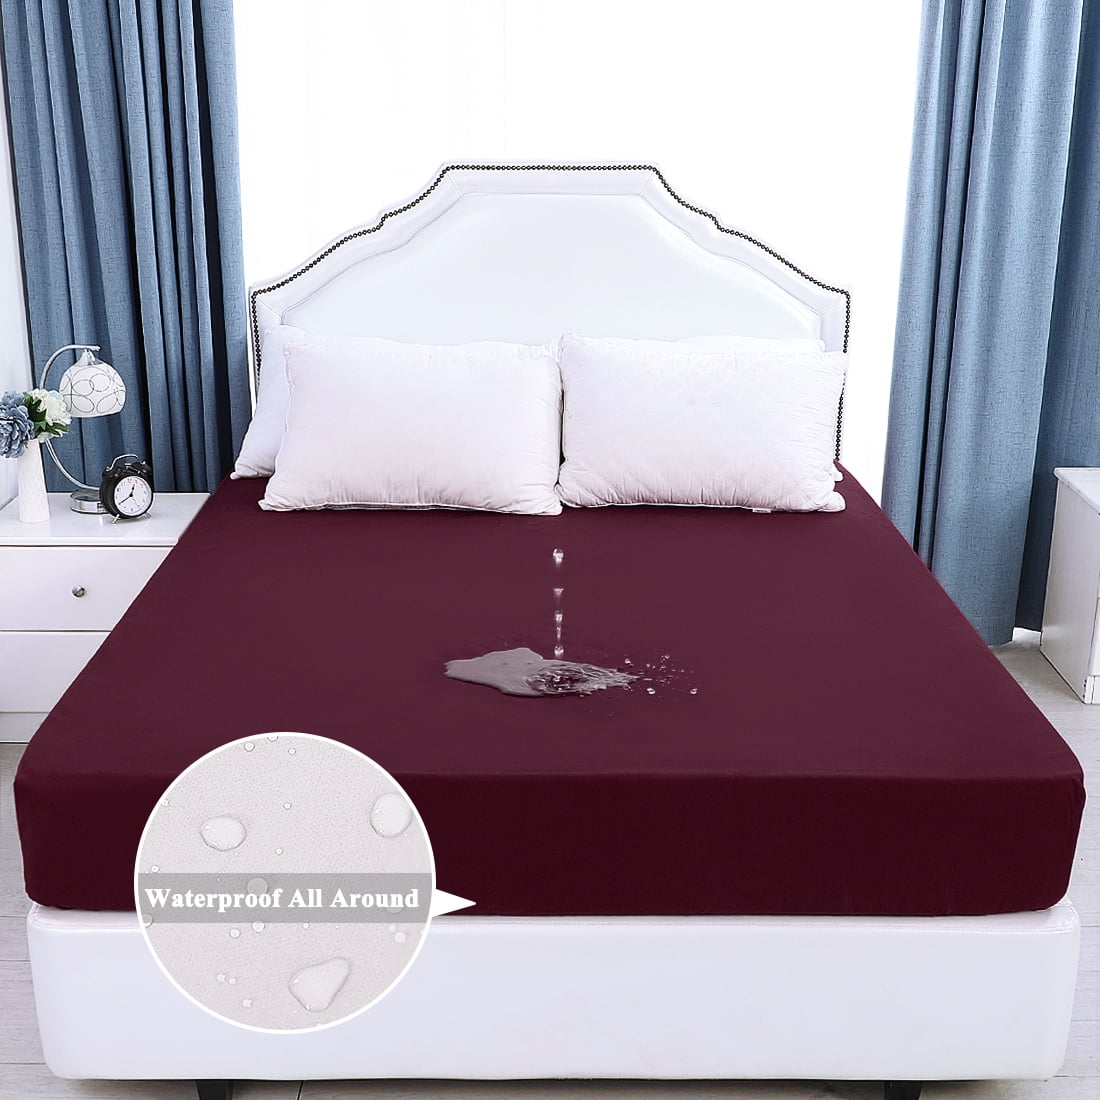 Details about   Waterproof Incontinence Mattress Cover Full Size for a King Size SEE VIDEO 